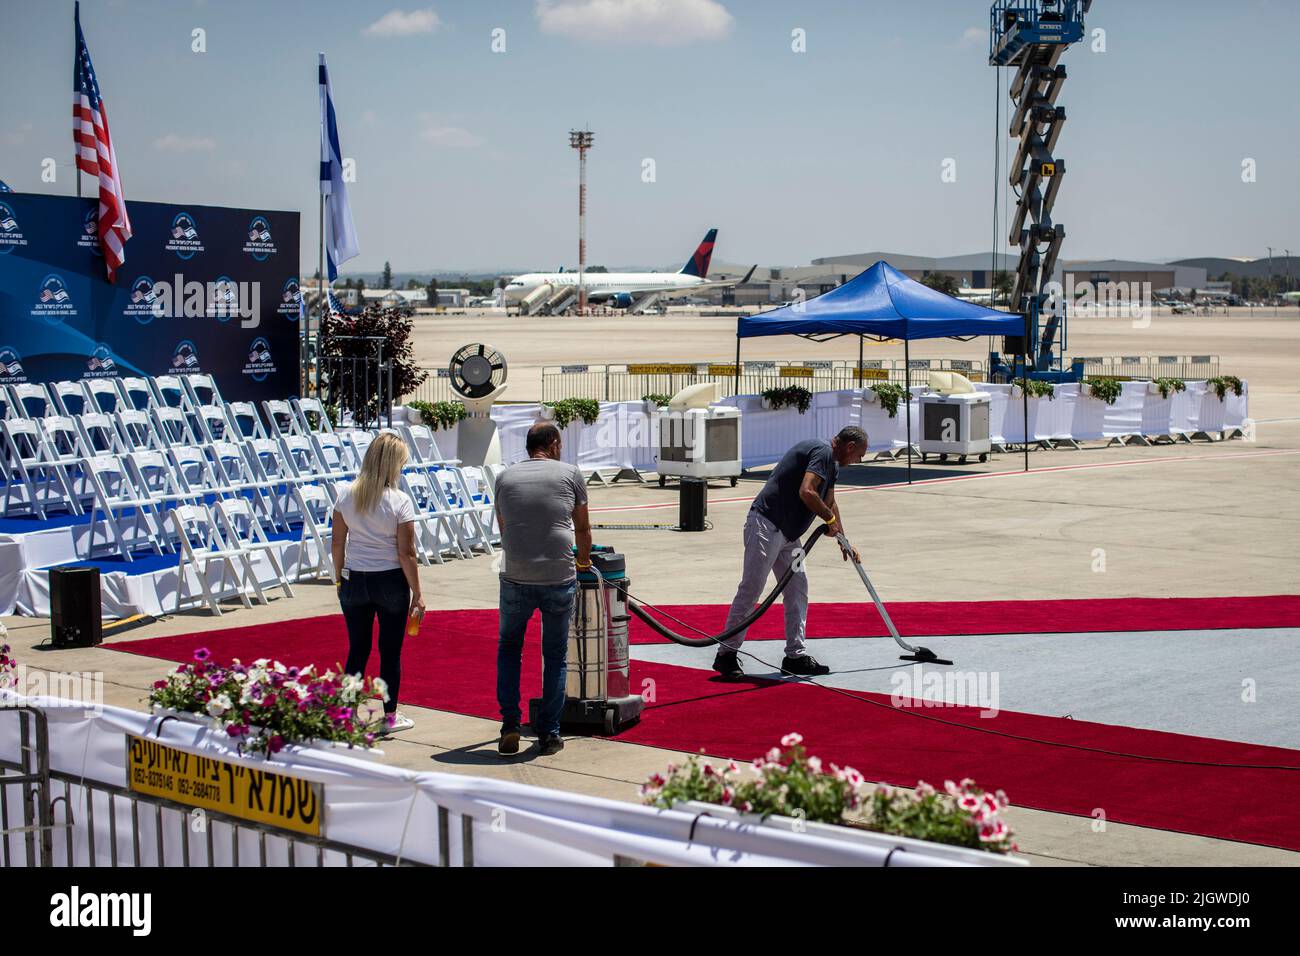 Lod, Israel. 13th July, 2022. Workers sweep a red carpet at Ben Gurion airport ahead of the arrival of US President Joe Biden for the state visit to Israel. Credit: Ilia Yefimovich/dpa/Alamy Live News Stock Photo